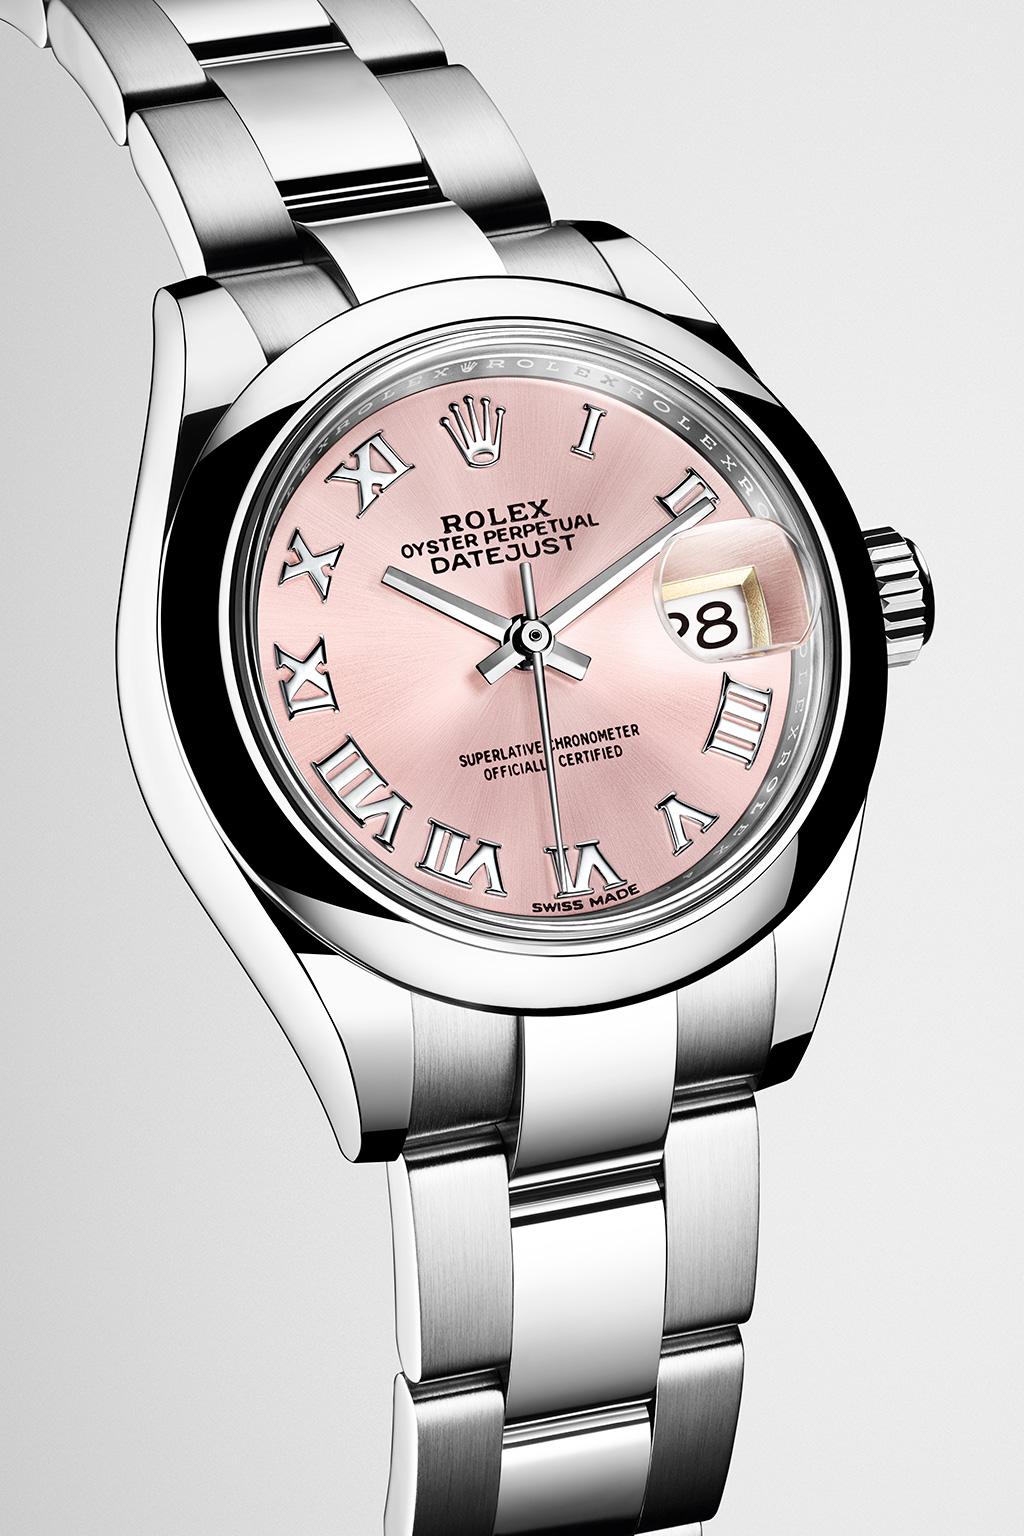 Style of the Lady-Datejust 28 PRESTIGE AND ELEGANCE Rolex s classic feminine watch, the Lady-Datejust 28, is in the lineage of the Datejust, the emblematic model that has been a byword for style and